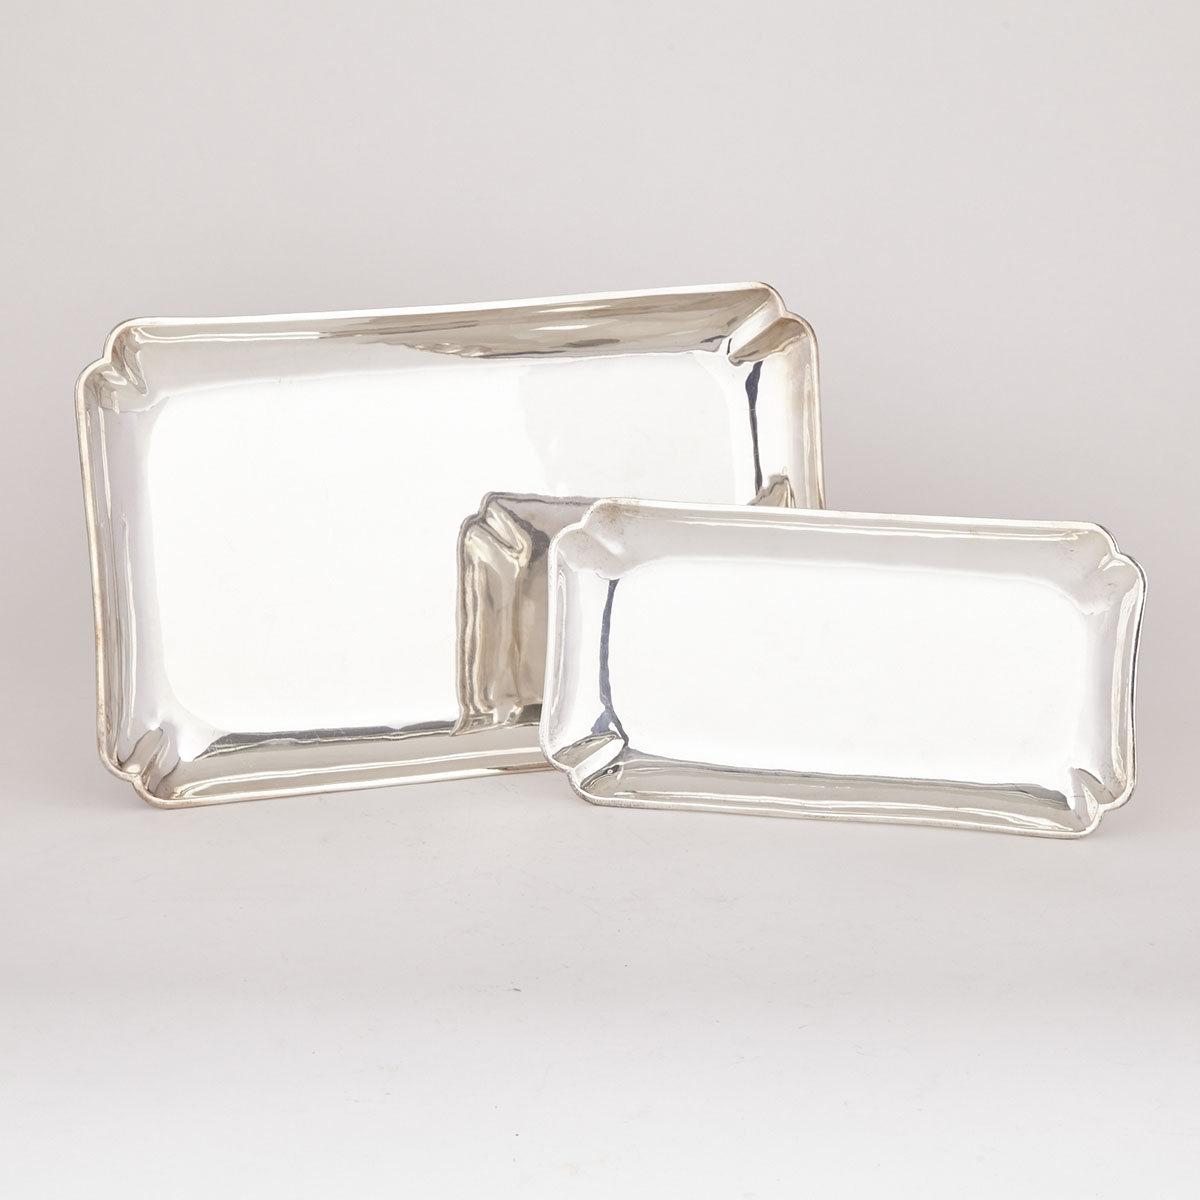 Two Mexican Silver Oblong Dishes, Juventino Lopez Reyes, Mexico City, mid-20th century